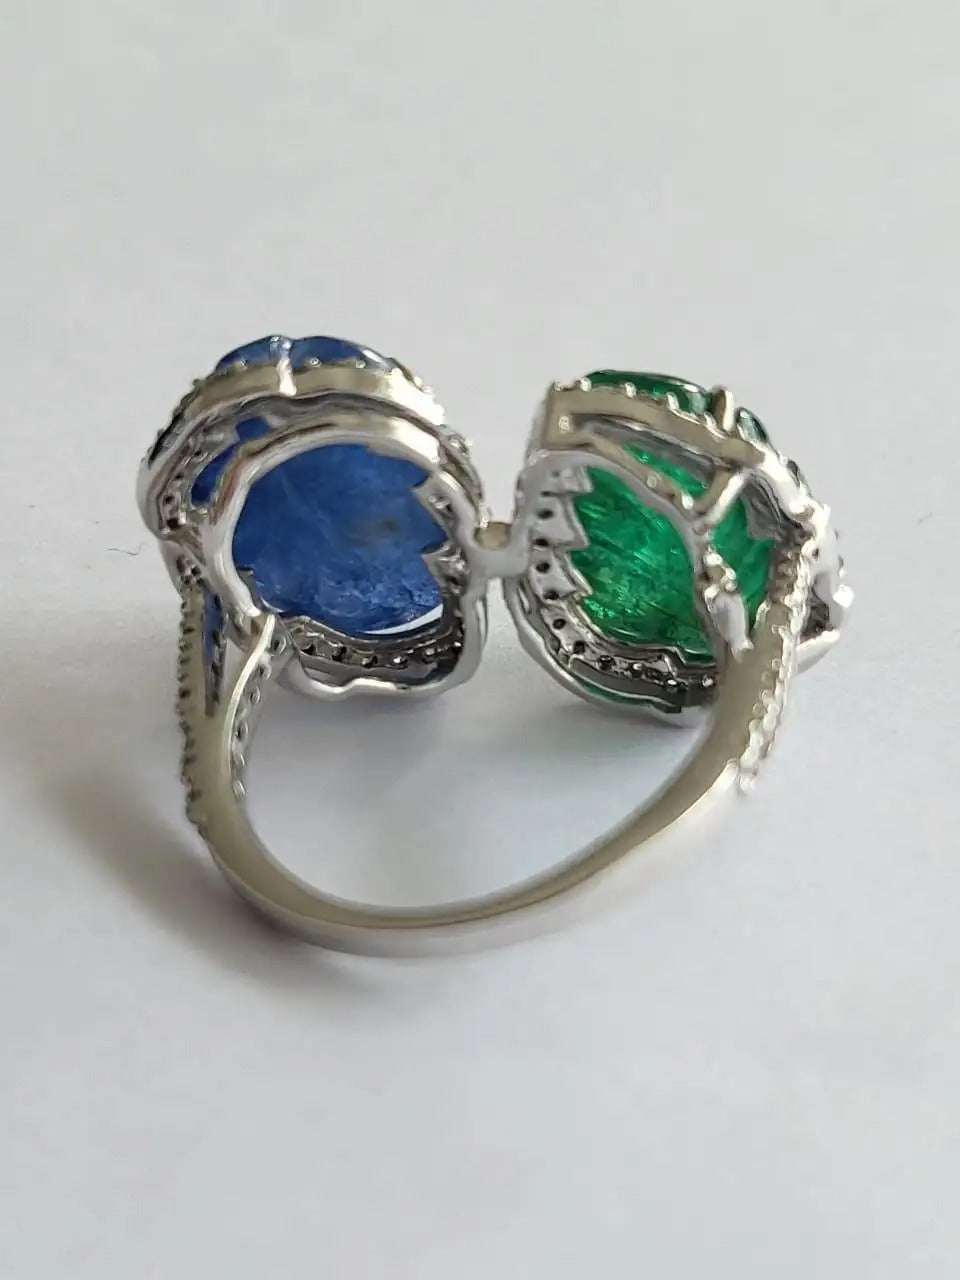 Natural carved Emerald in 18K Gold, Blue Sapphire & Diamonds Cocktail Ring